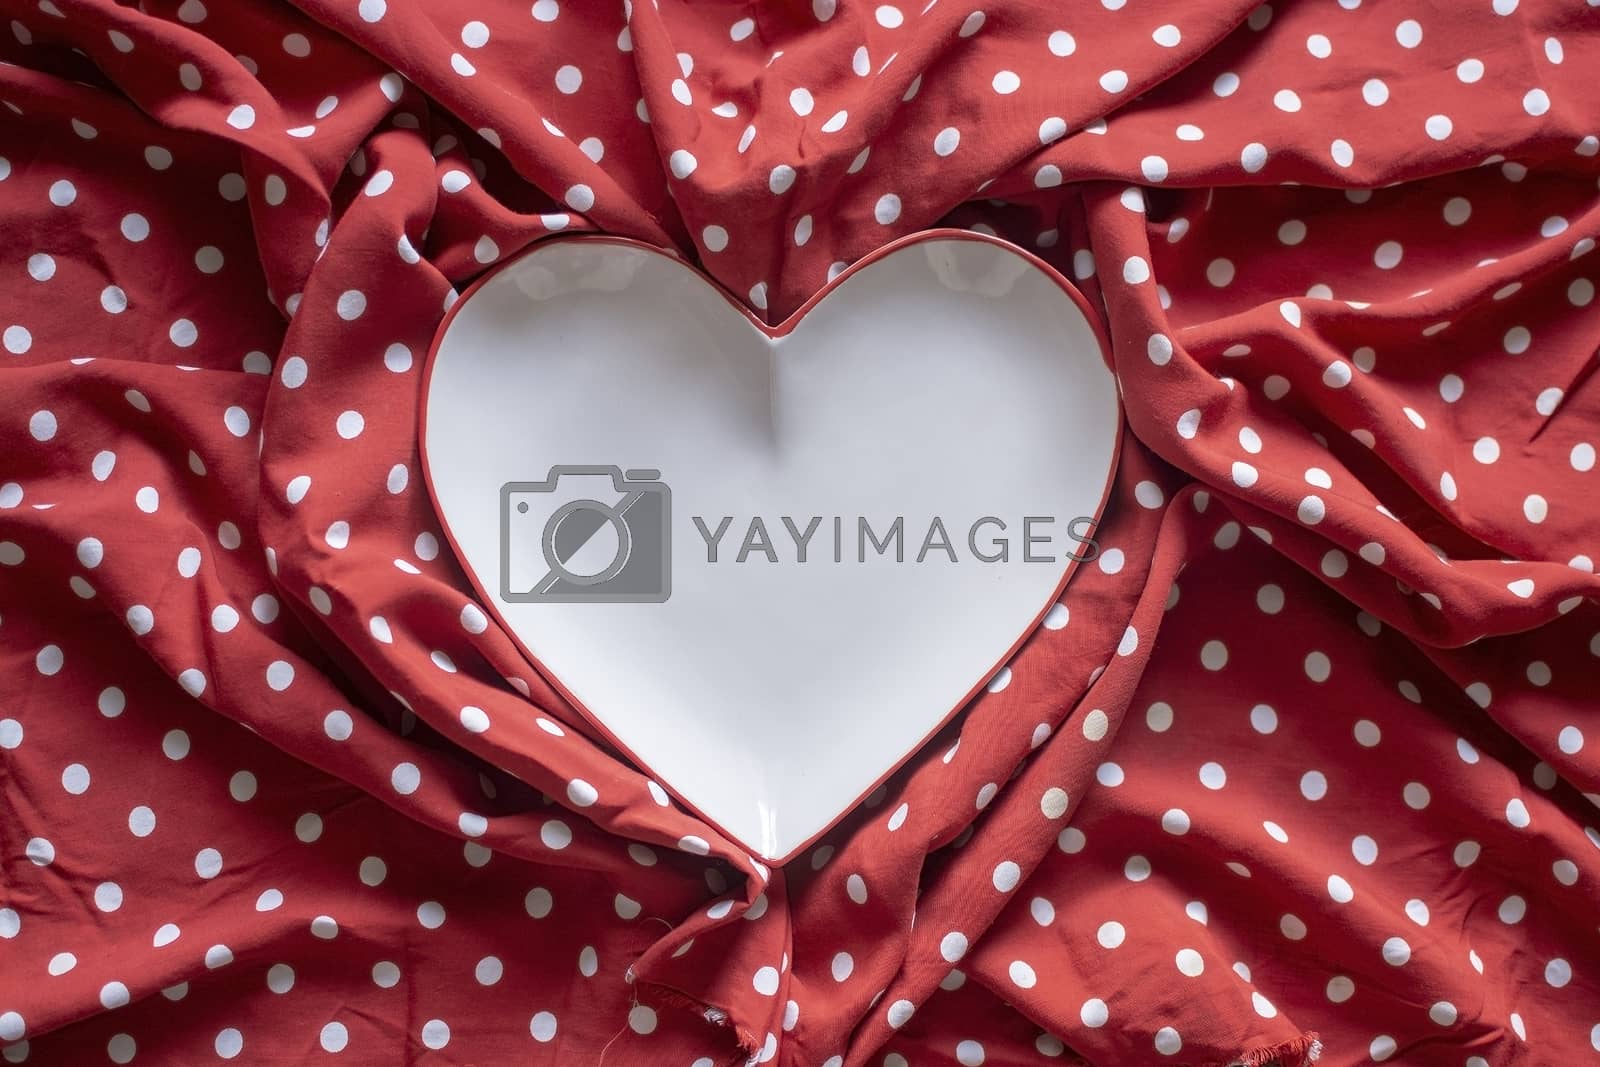 Royalty free image of Stoneware heart plate on red and white polka dot print  by ArtesiaWells